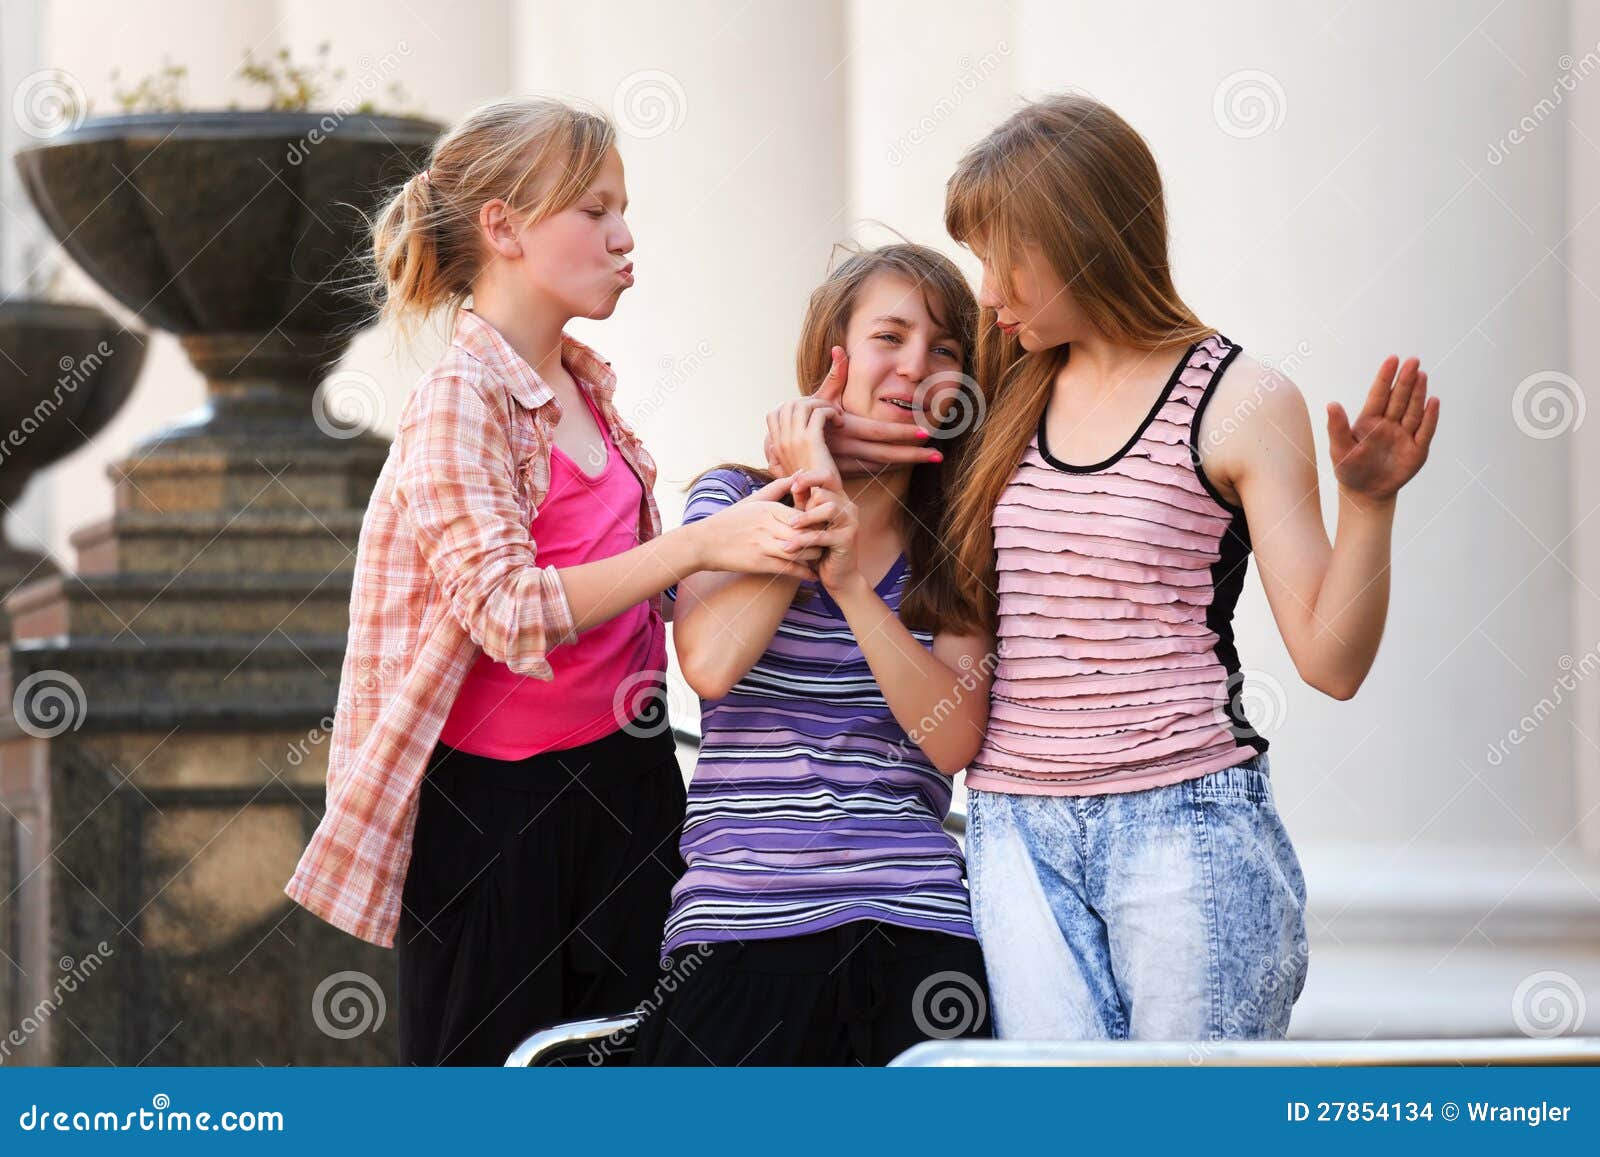 Young Girls Having Fun In A Campus Stock Images Im